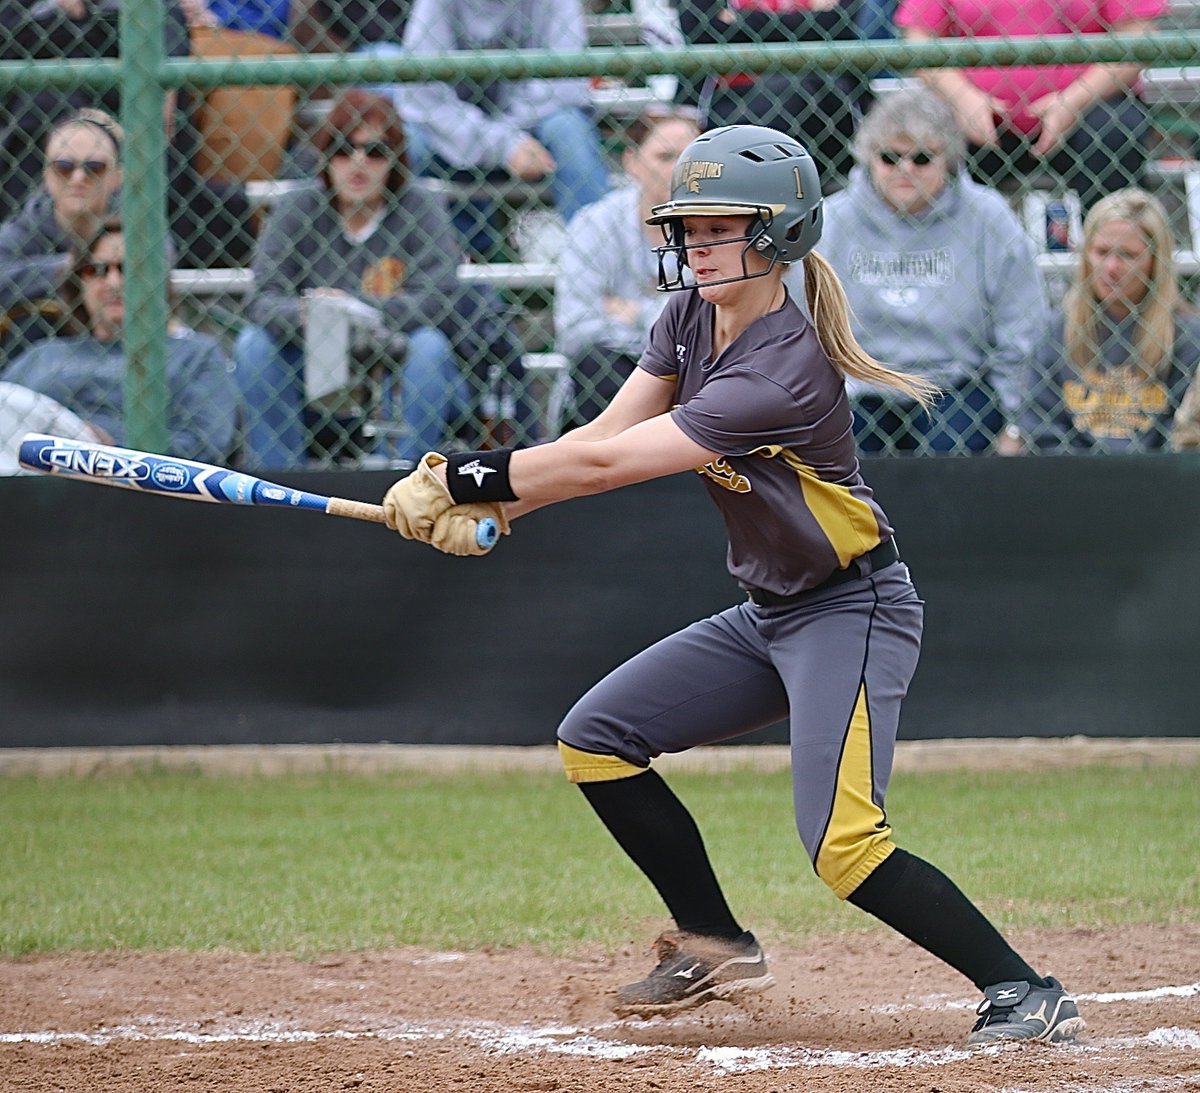 Image: Bailey Eubank(1) hits the ball into play for the Lady Gladiators.